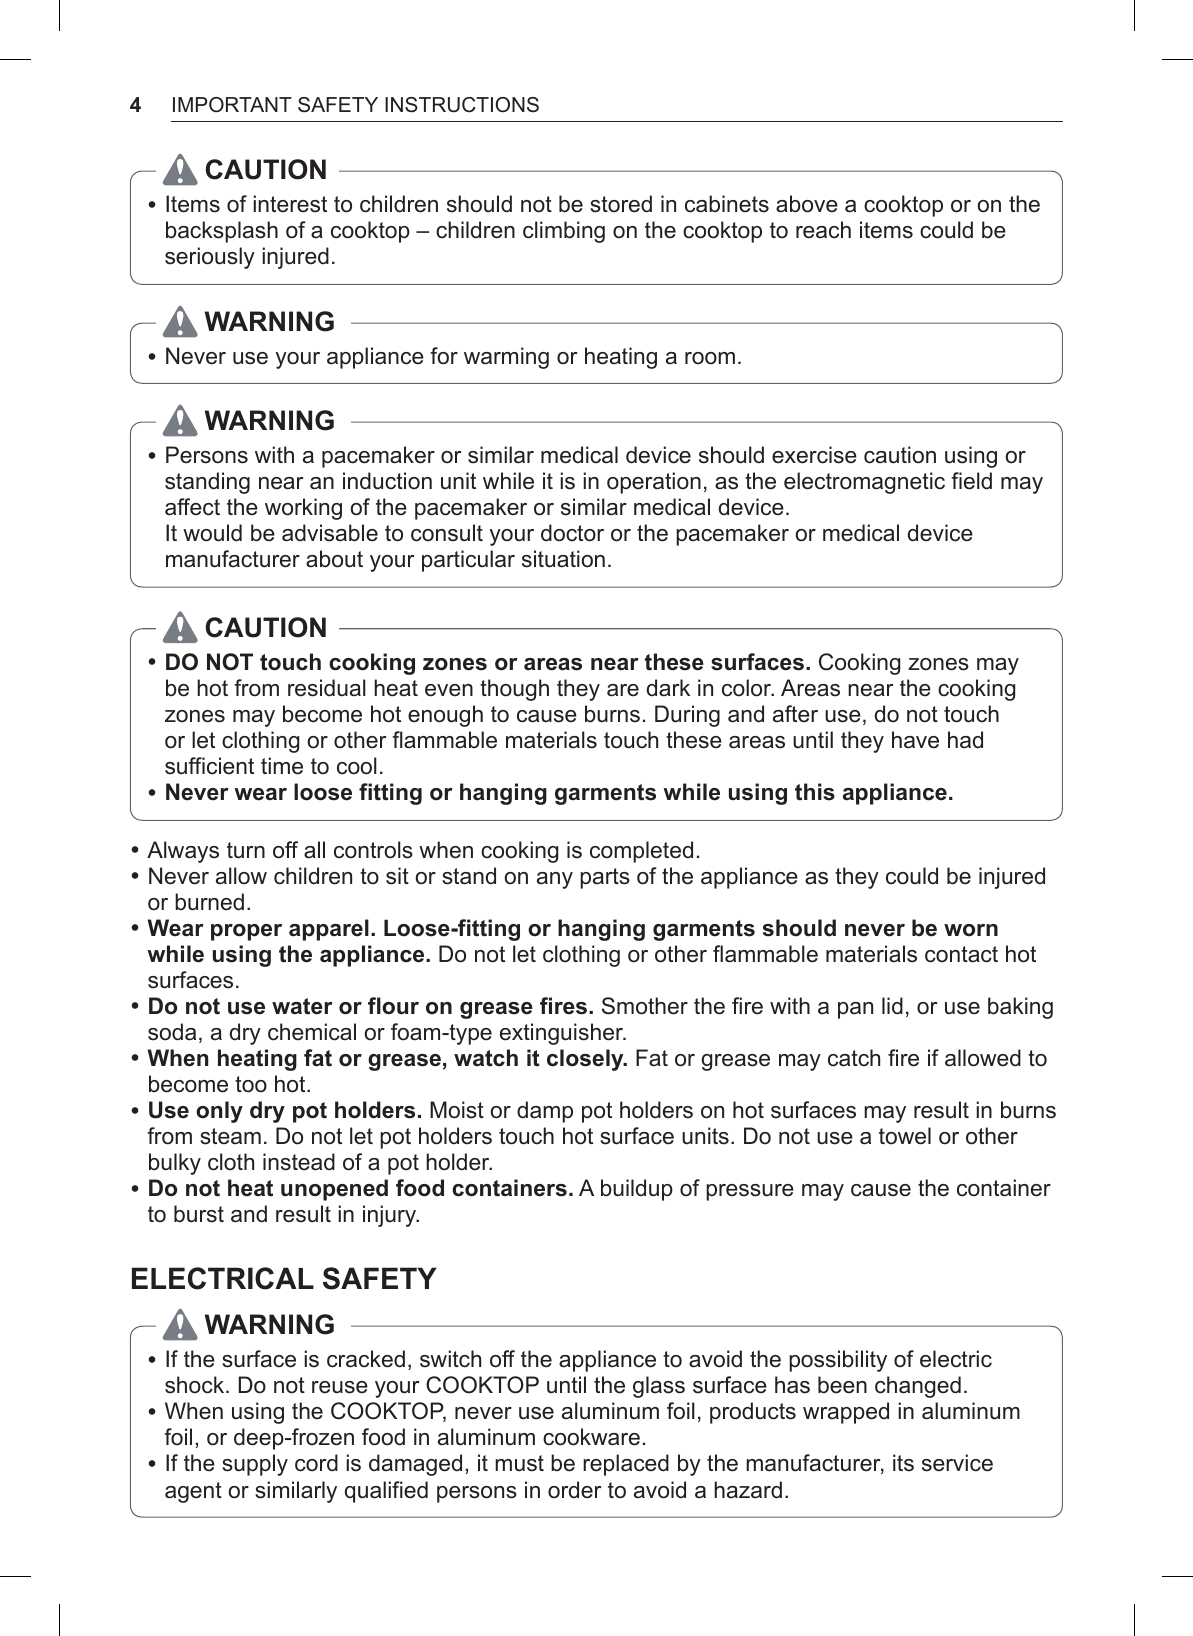 4IMPORTANT SAFETY INSTRUCTIONSCAUTION •Items of interest to children should not be stored in cabinets above a cooktop or on the backsplash of a cooktop – children climbing on the cooktop to reach items could be seriously injured.WARNING •Never use your appliance for warming or heating a room.WARNING •Persons with a pacemaker or similar medical device should exercise caution using or standing near an induction unit while it is in operation, as the electromagnetic field may affect the working of the pacemaker or similar medical device. It would be advisable to consult your doctor or the pacemaker or medical device manufacturer about your particular situation.CAUTION •DO NOT touch cooking zones or areas near these surfaces. Cooking zones may be hot from residual heat even though they are dark in color. Areas near the cooking zones may become hot enough to cause burns. During and after use, do not touch or let clothing or other flammable materials touch these areas until they have had sufficient time to cool. •Never wear loose fitting or hanging garments while using this appliance. •Always turn off all controls when cooking is completed. •Never allow children to sit or stand on any parts of the appliance as they could be injured or burned. •Wear proper apparel. Loose-fitting or hanging garments should never be worn while using the appliance. Do not let clothing or other flammable materials contact hot surfaces. •Do not use water or flour on grease fires. Smother the fire with a pan lid, or use baking soda, a dry chemical or foam-type extinguisher. •When heating fat or grease, watch it closely. Fat or grease may catch fire if allowed to become too hot. •Use only dry pot holders. Moist or damp pot holders on hot surfaces may result in burns from steam. Do not let pot holders touch hot surface units. Do not use a towel or other bulky cloth instead of a pot holder. •Do not heat unopened food containers. A buildup of pressure may cause the container to burst and result in injury.ELECTRICAL SAFETYWARNING • If the surface is cracked, switch off the appliance to avoid the possibility of electric shock. Do not reuse your COOKTOP until the glass surface has been changed. •When using the COOKTOP, never use aluminum foil, products wrapped in aluminum foil, or deep-frozen food in aluminum cookware. •If the supply cord is damaged, it must be replaced by the manufacturer, its service agent or similarly qualified persons in order to avoid a hazard.